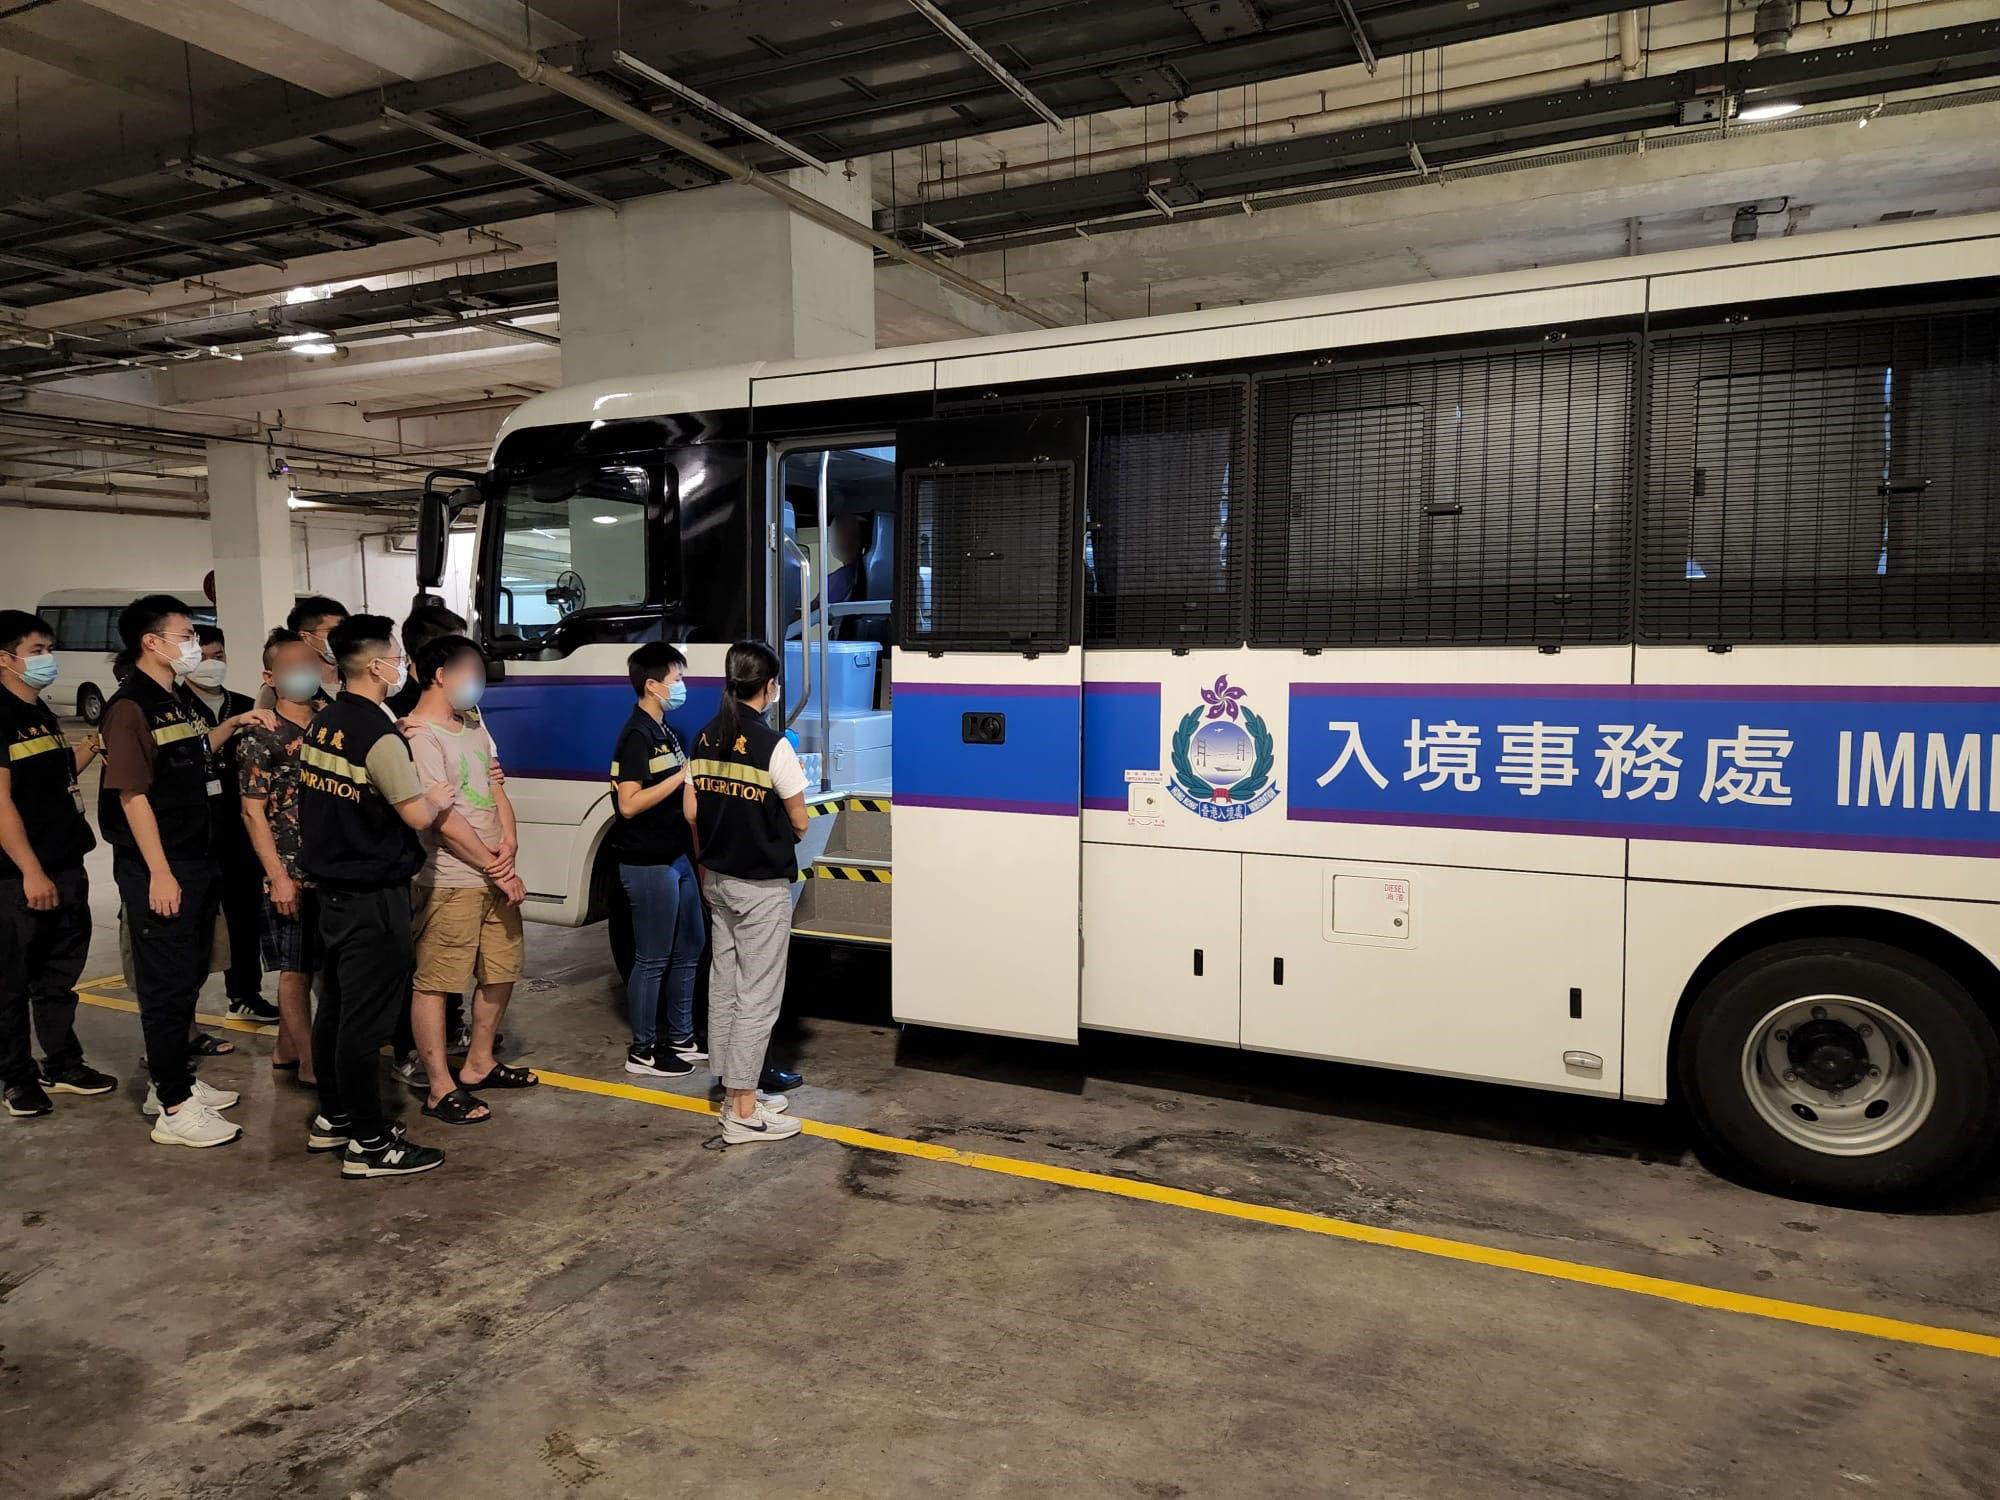 The Immigration Department mounted a series of territory-wide anti-illegal worker operations codenamed "Lightshadow" and "Twilight" and a joint operation with the Hong Kong Police Force codenamed "Champion" for four consecutive days from September 5 to yesterday (September 8). Photo shows suspected illegal workers arrested during an operation.